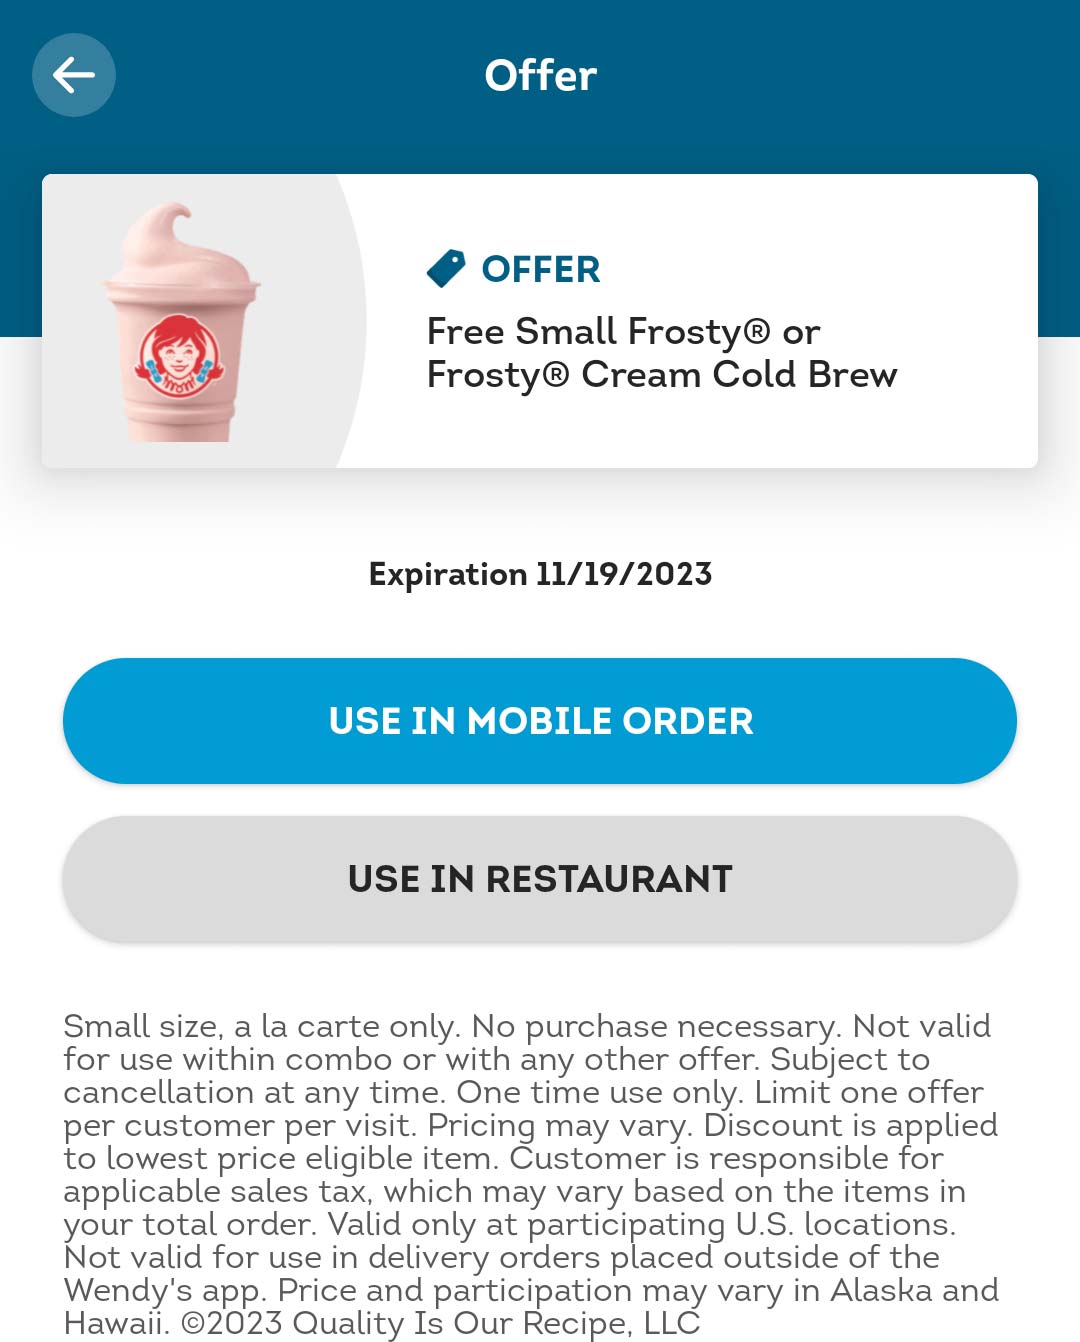 Wendys restaurants Coupon  Free peppermint frosty or cold brew via mobile today at Wendys restaurants #wendys 